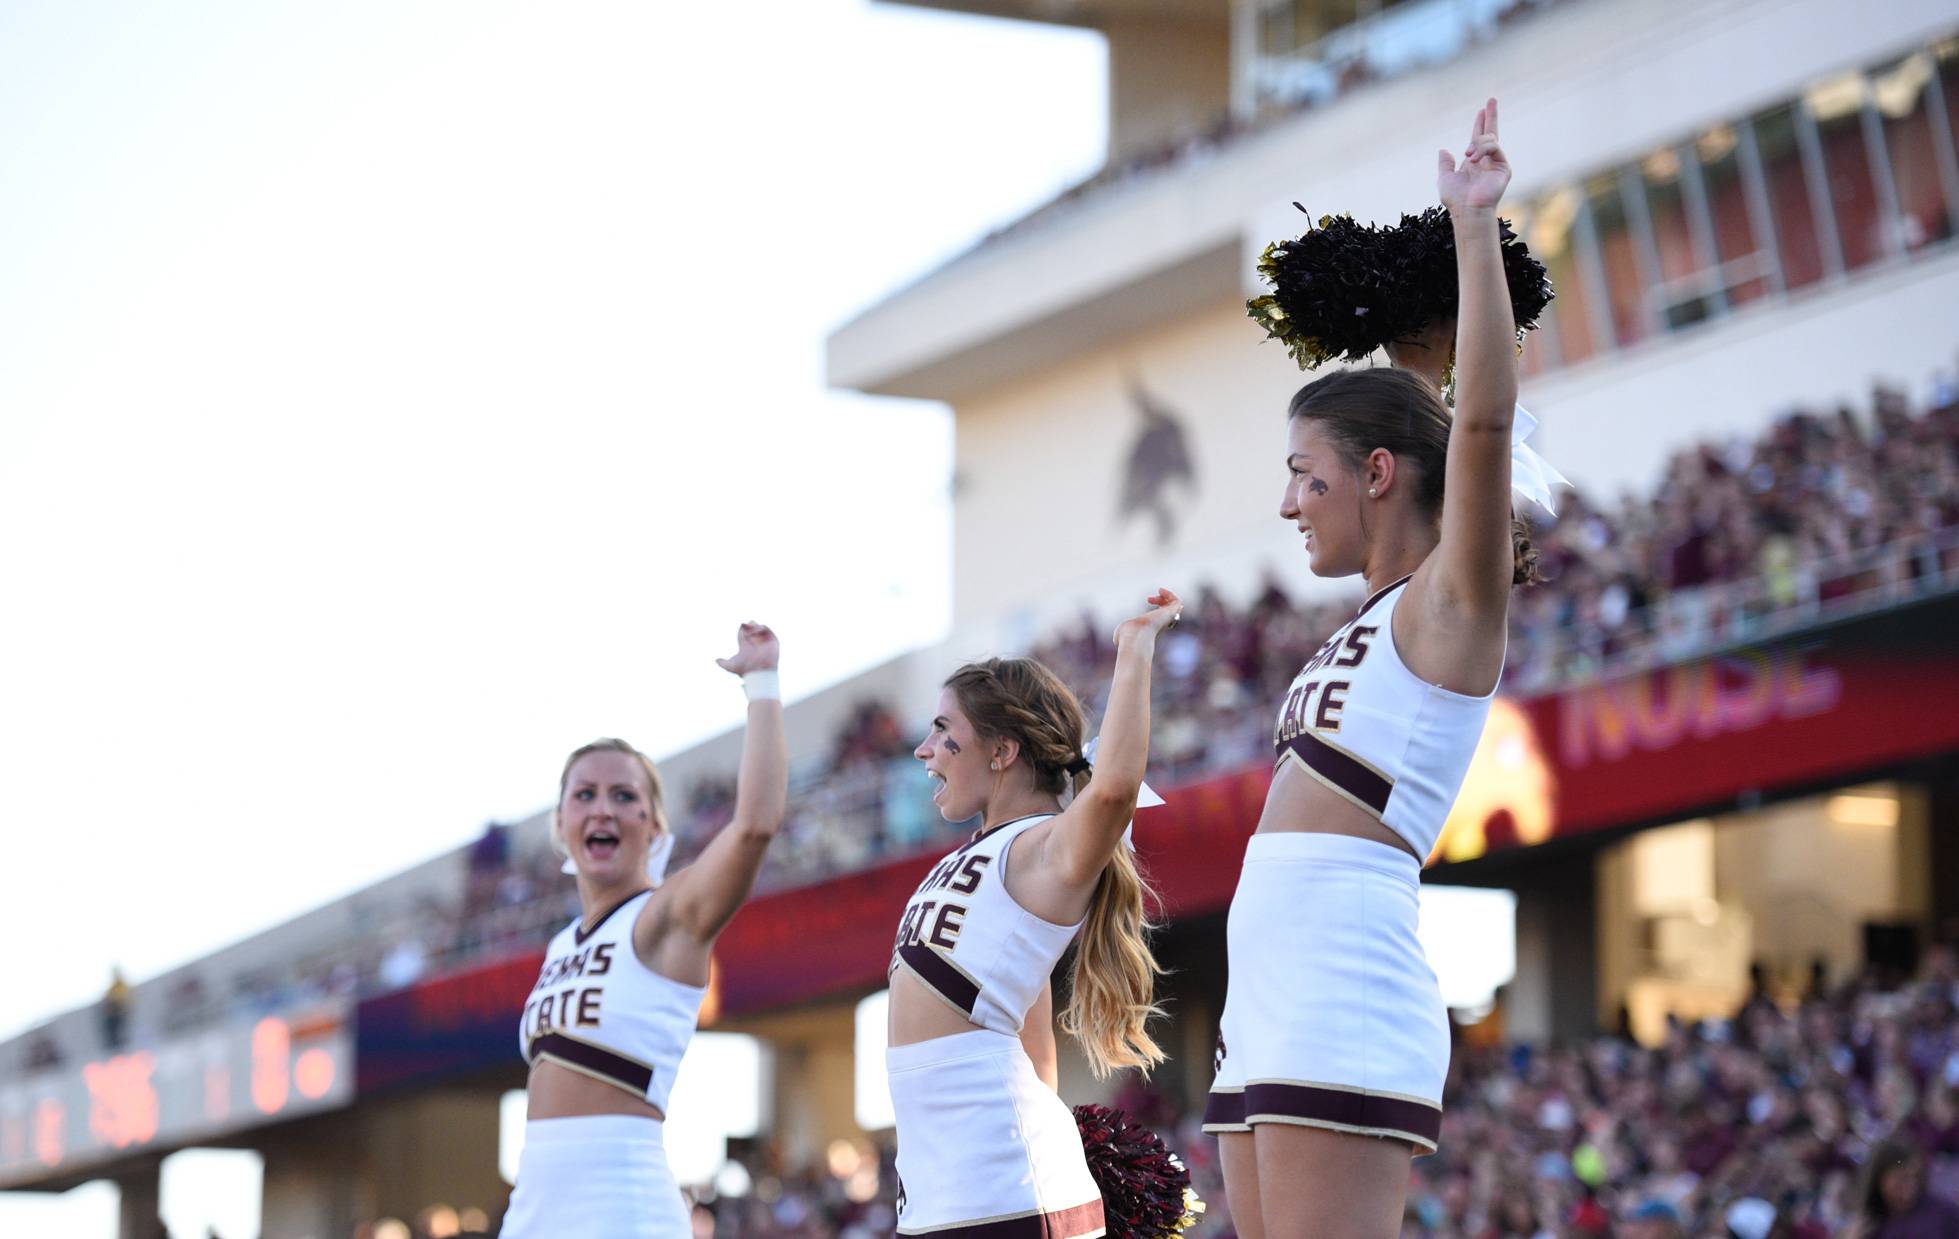 Cheer leaders performing at a football game